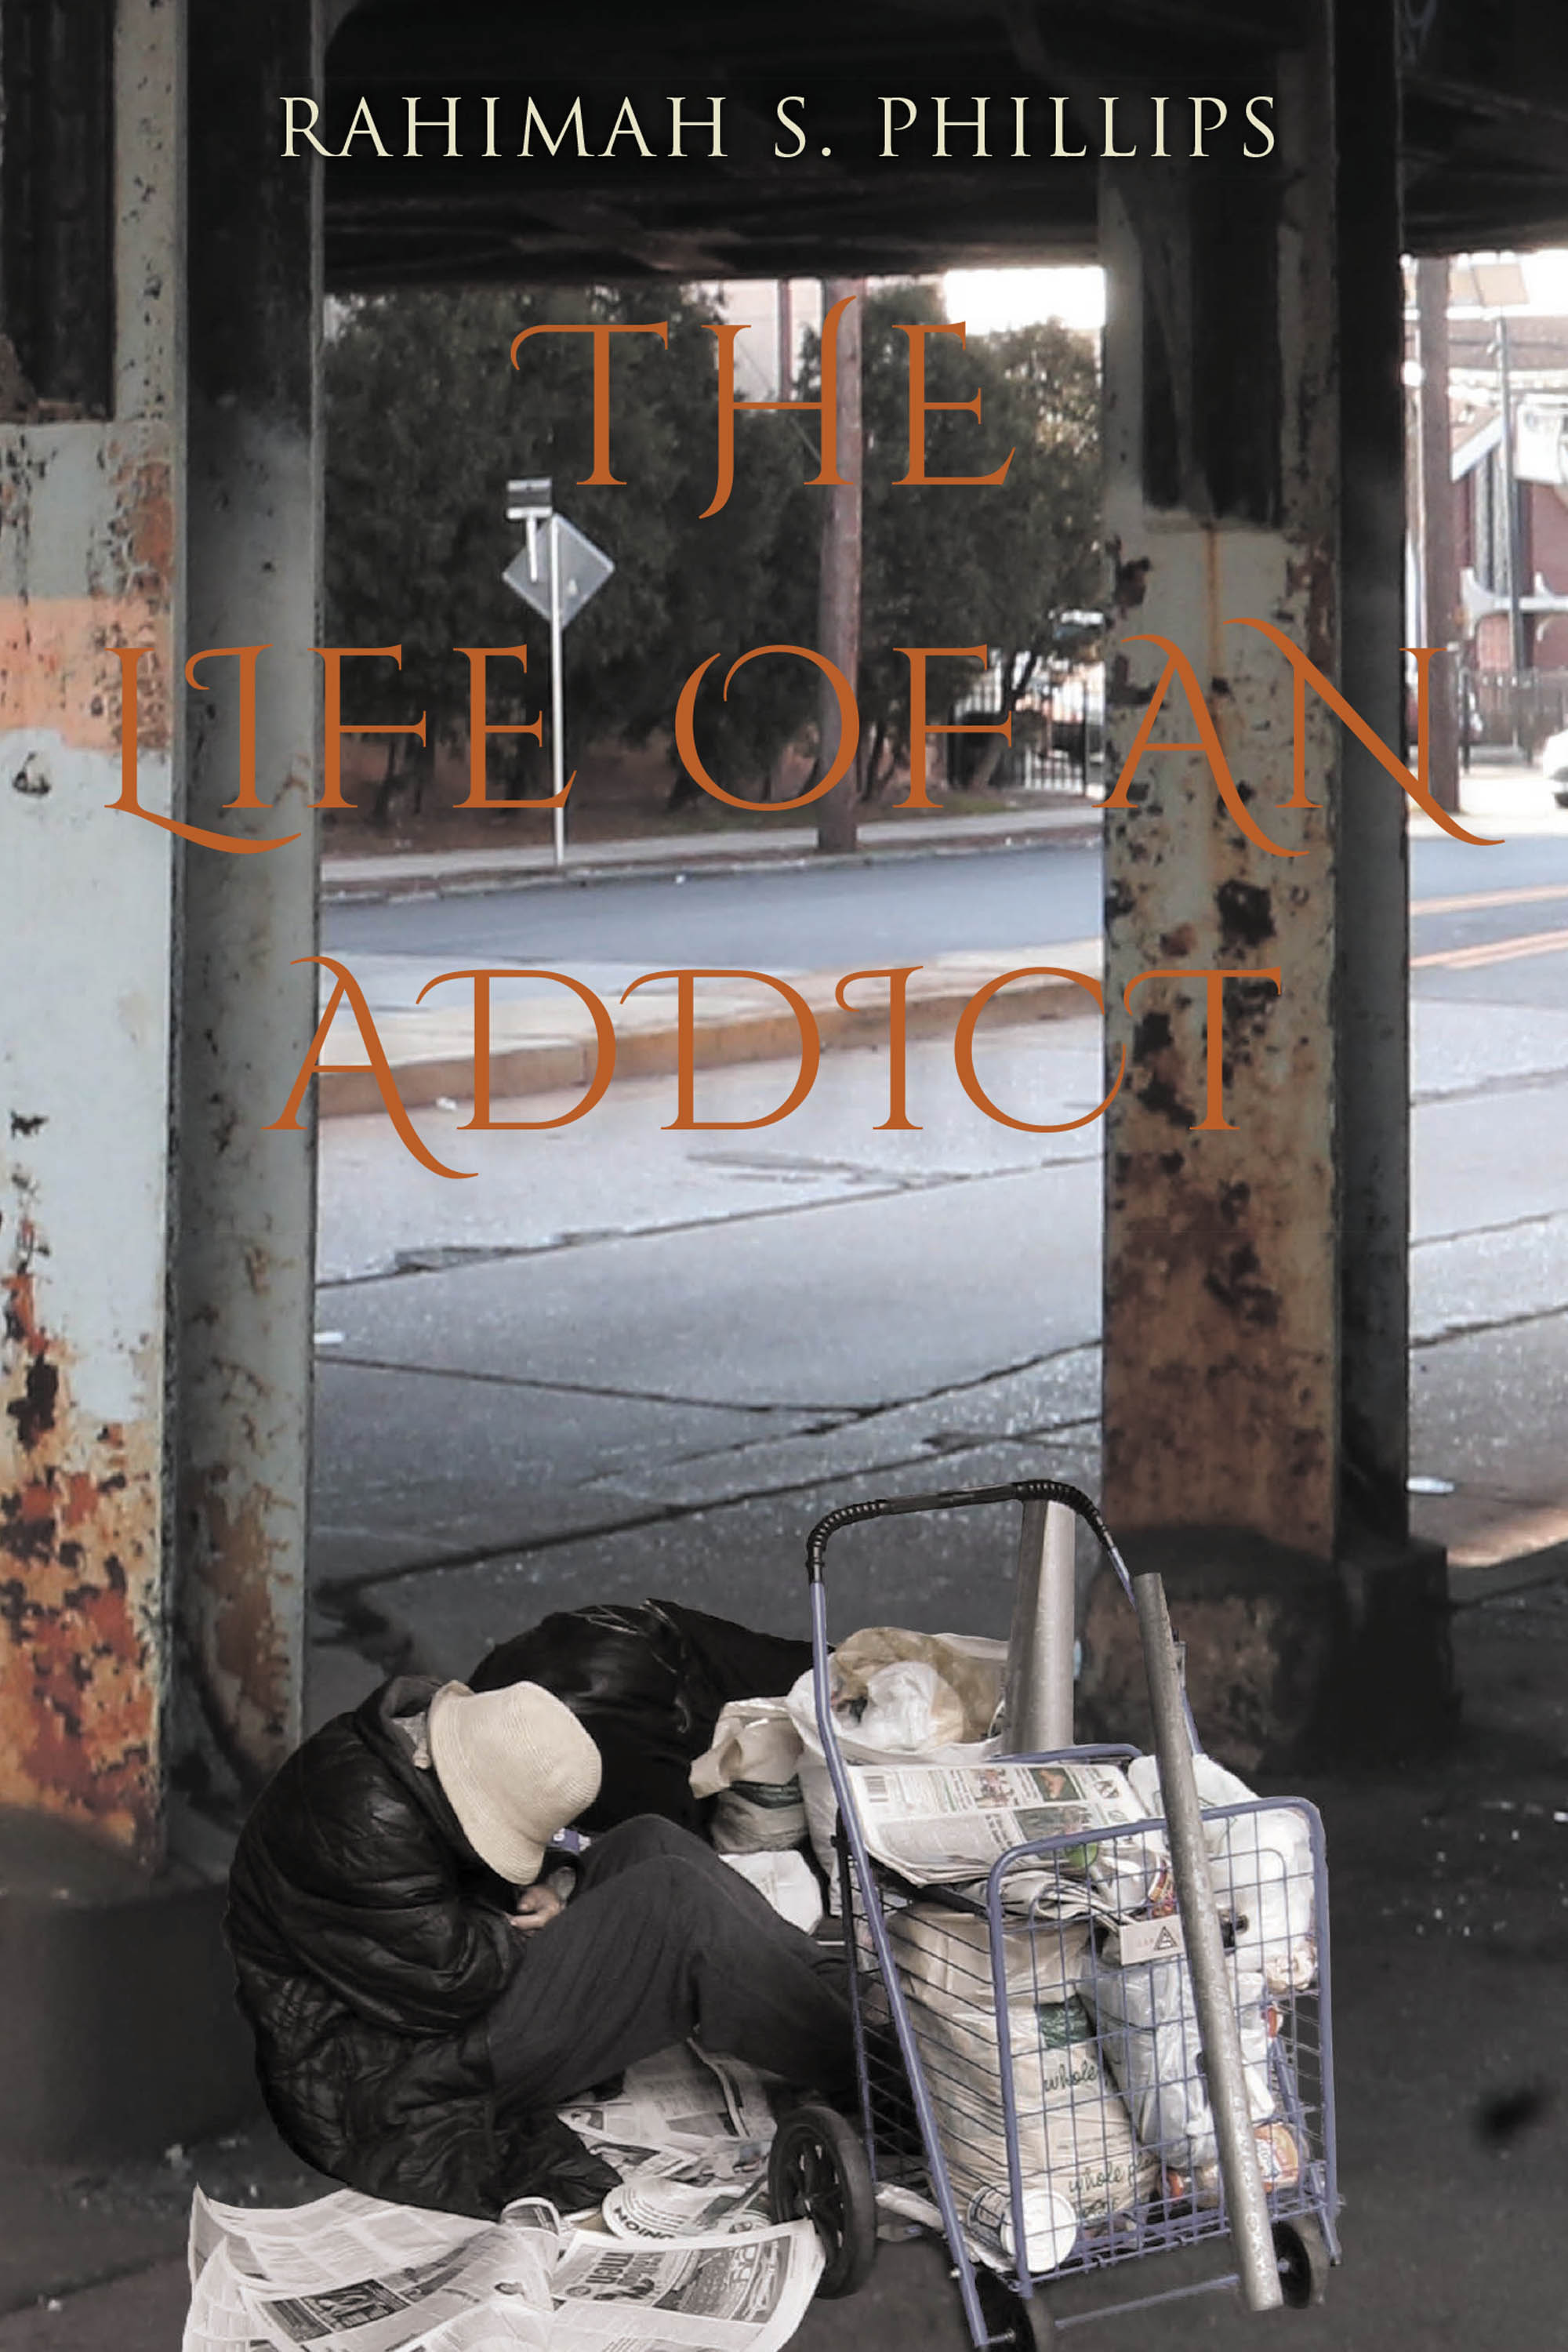 Rahimah S. Phillips’s Newly Released “The Life Of An Addict” is a Compelling Collection of Ten Short, Yet Deeply Personal, Stories About People Struggling with Addiction